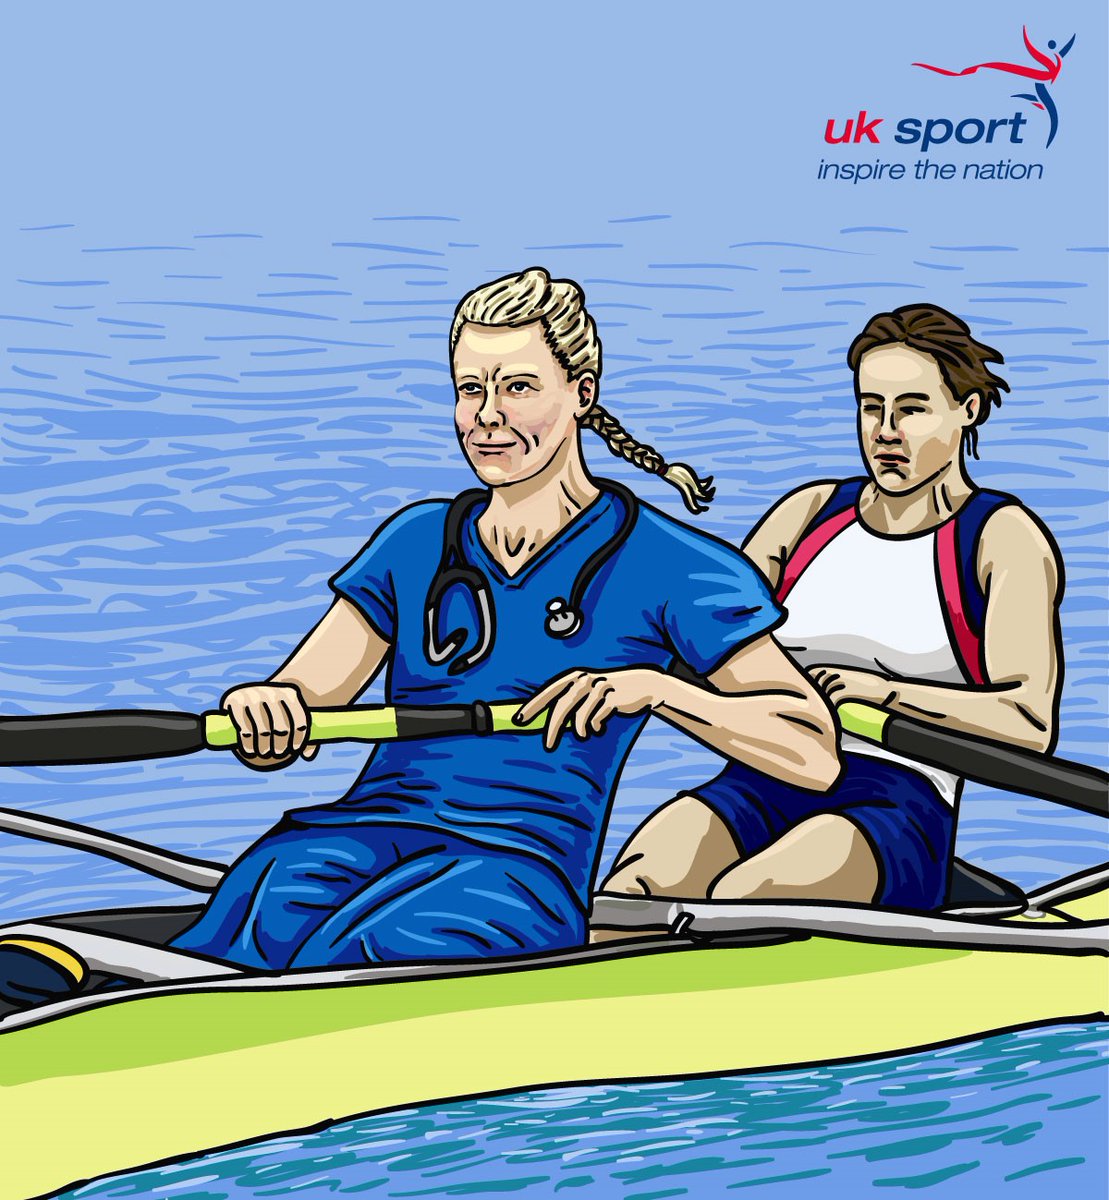 British rower and Rio Olympic silver medalist, Polly Swann stepped back into her medical role to support the NHS during the pandemic   #ThankYou  @BritishRowing |  #TNLAthlete